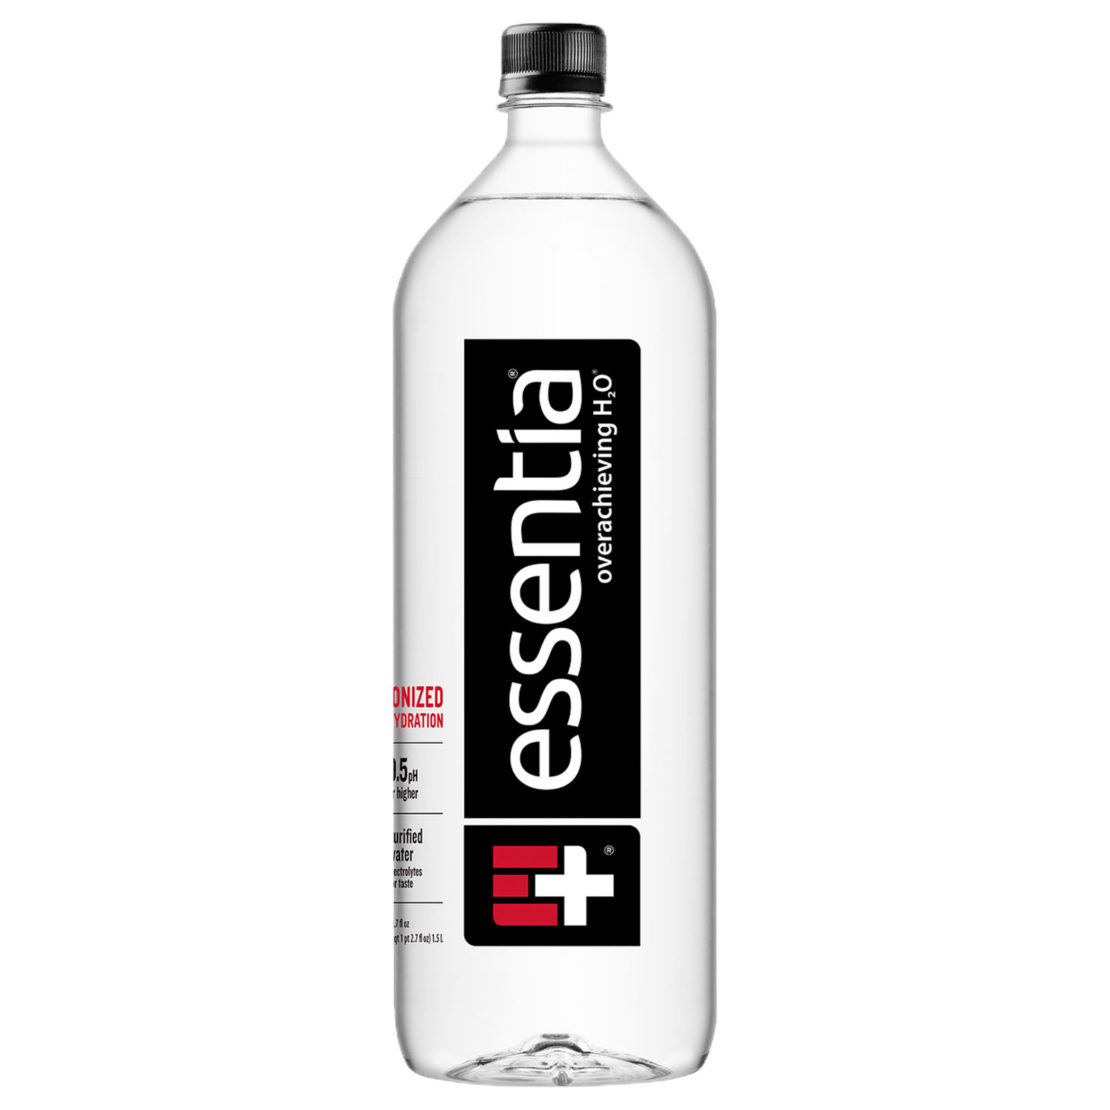 A bottle of Essentia water